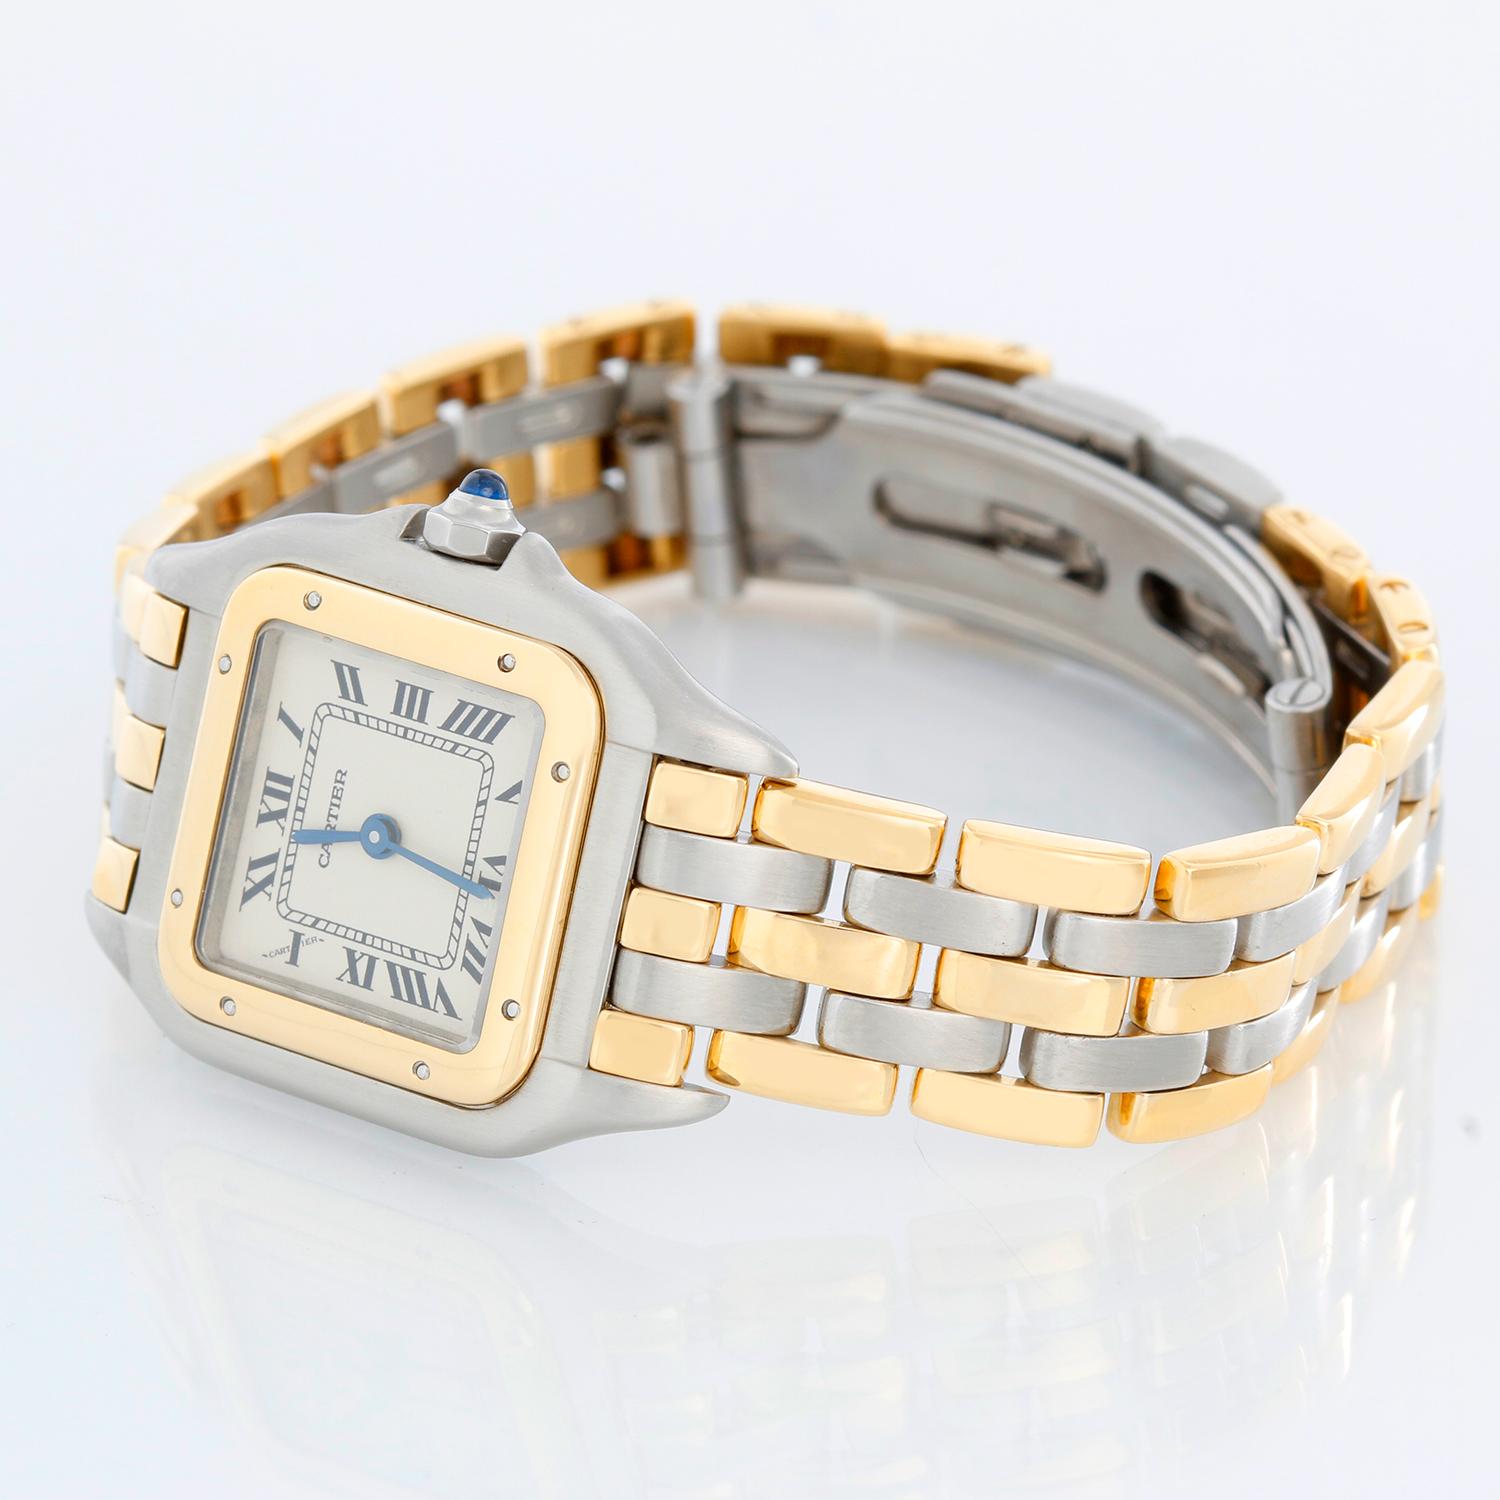 Cartier Panther Ladies 2-Tone 3-Row Steel & Gold Watch - Quartz. Stainless steel case with 18k yellow gold bezel (21mm x 30mm). White dial with black Roman numerals. Stainless steel and 3-row 18k yellow gold Panthere bracelet. Pre-owned with custom